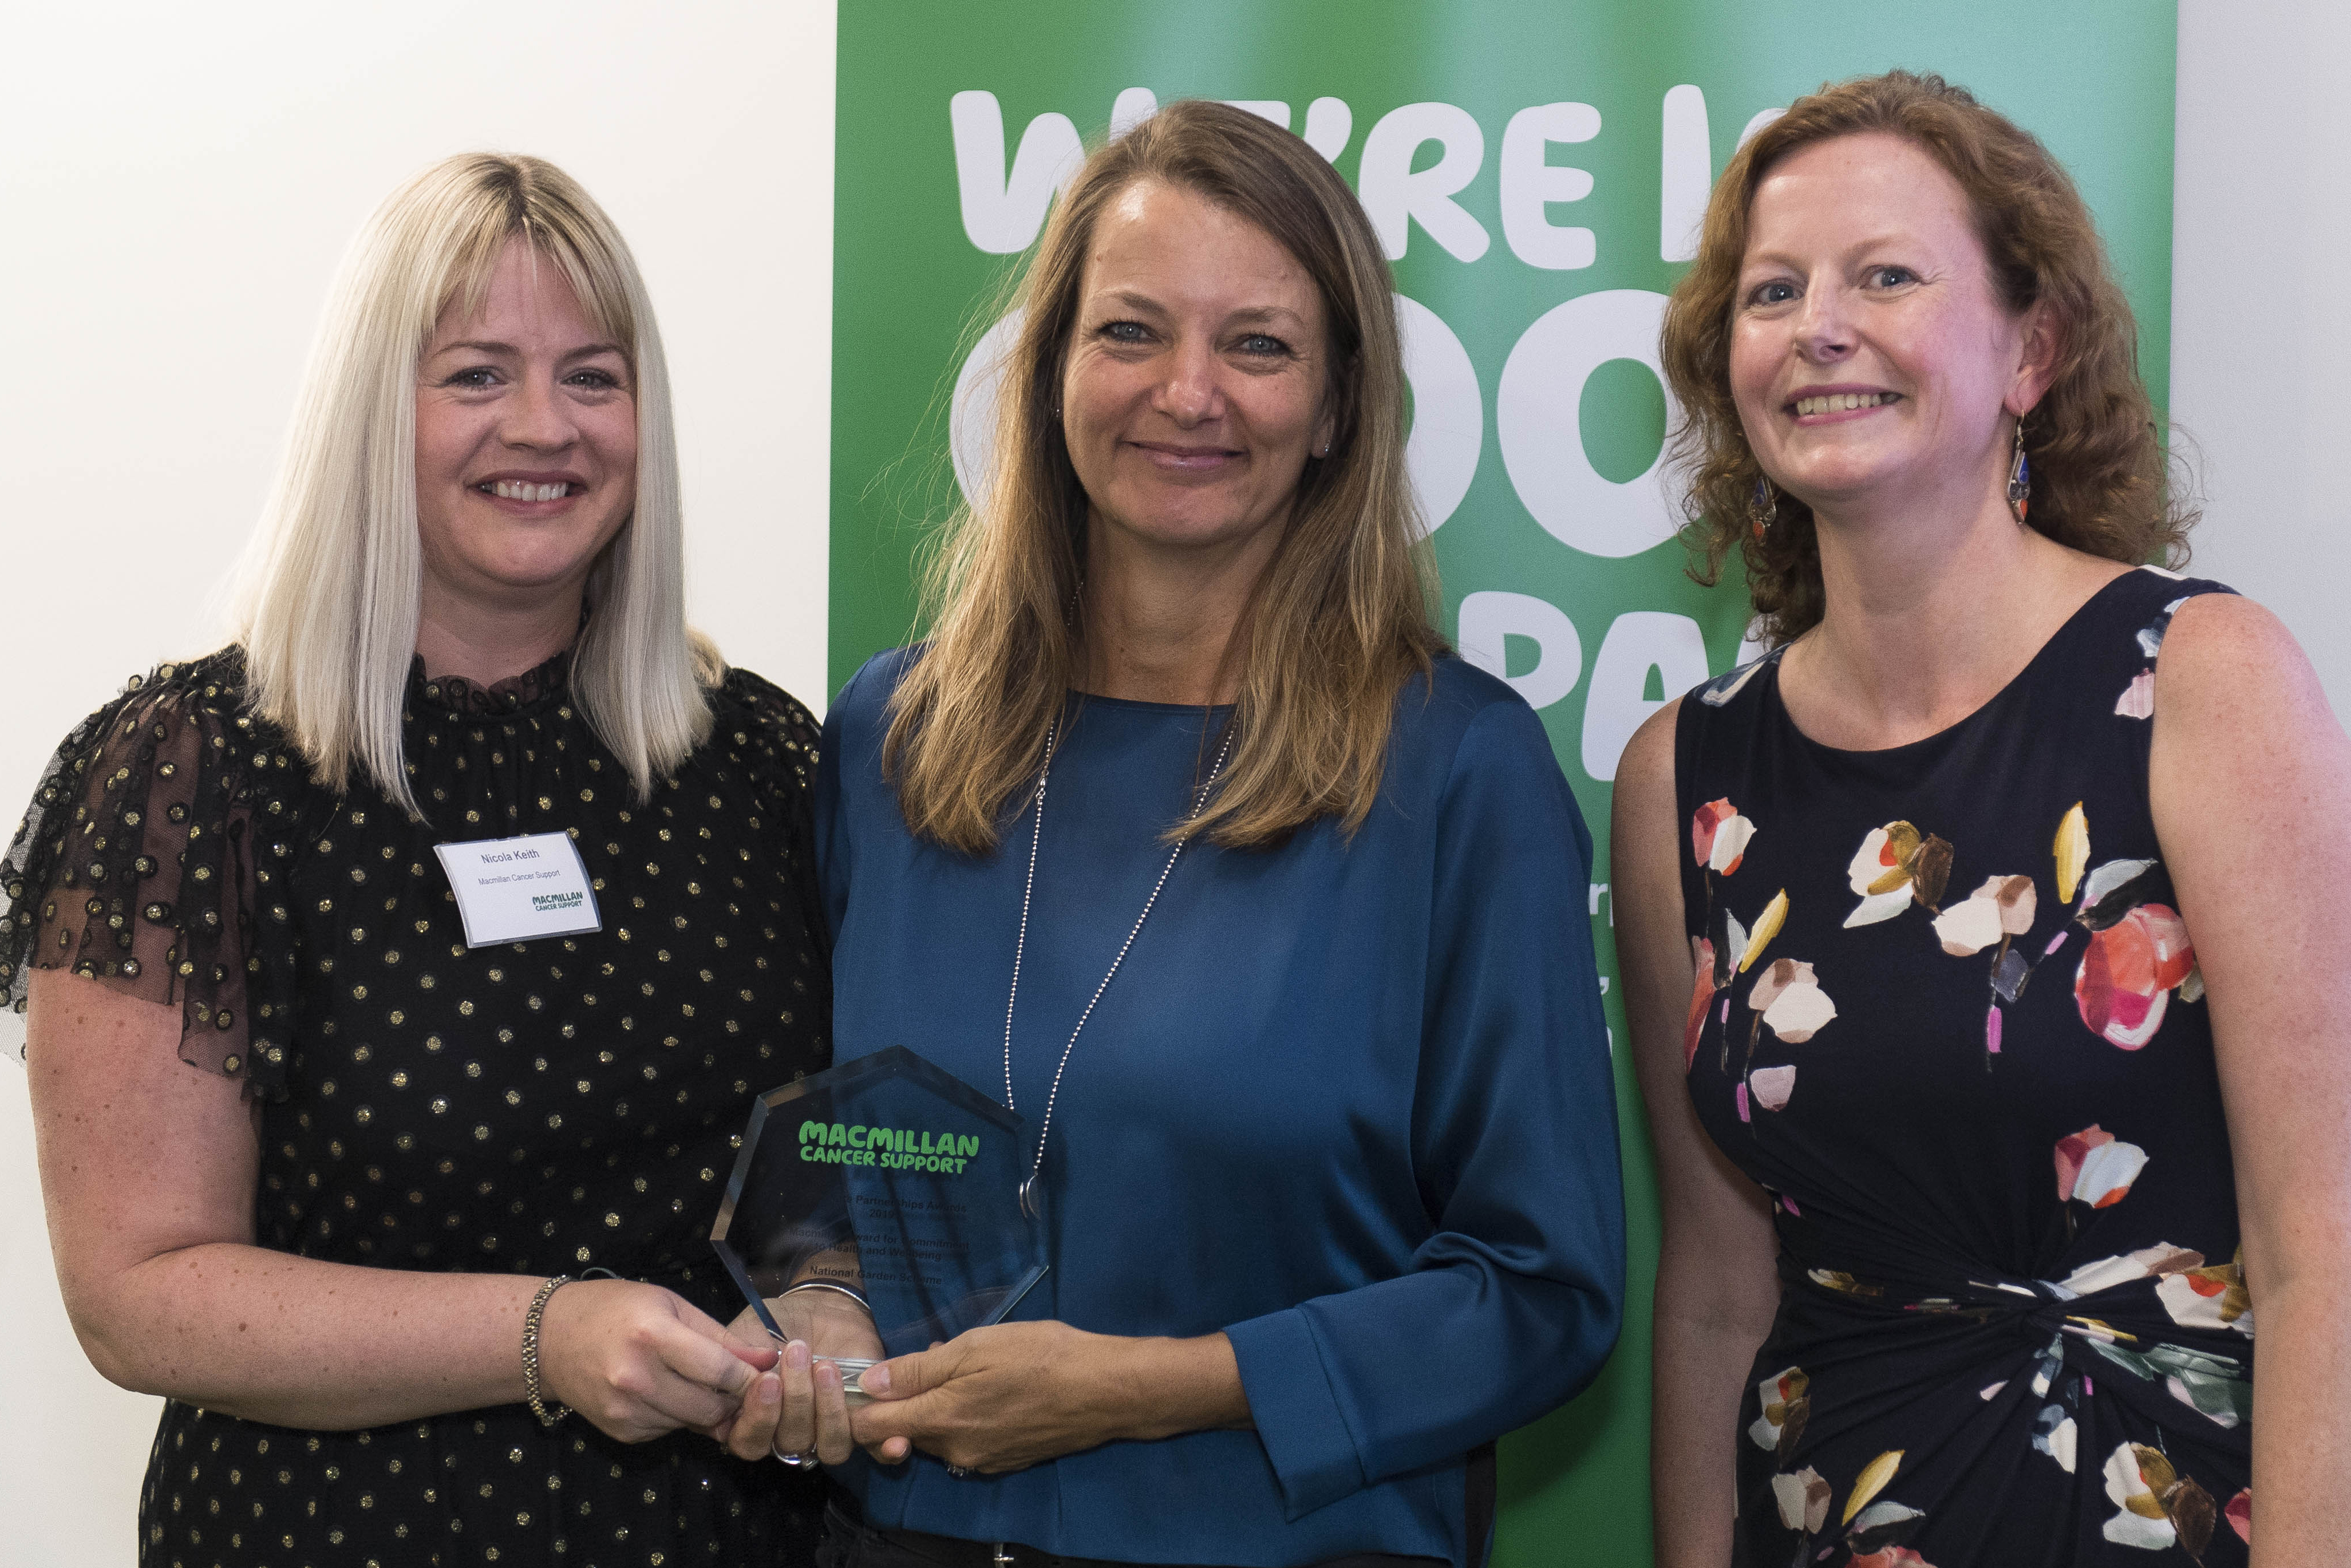 Macmillan Cancer Support's Nicola Keith (left) and Natasha Parker (right) present the award for Commitment to Health and Wellbeing to Vicky Flynn